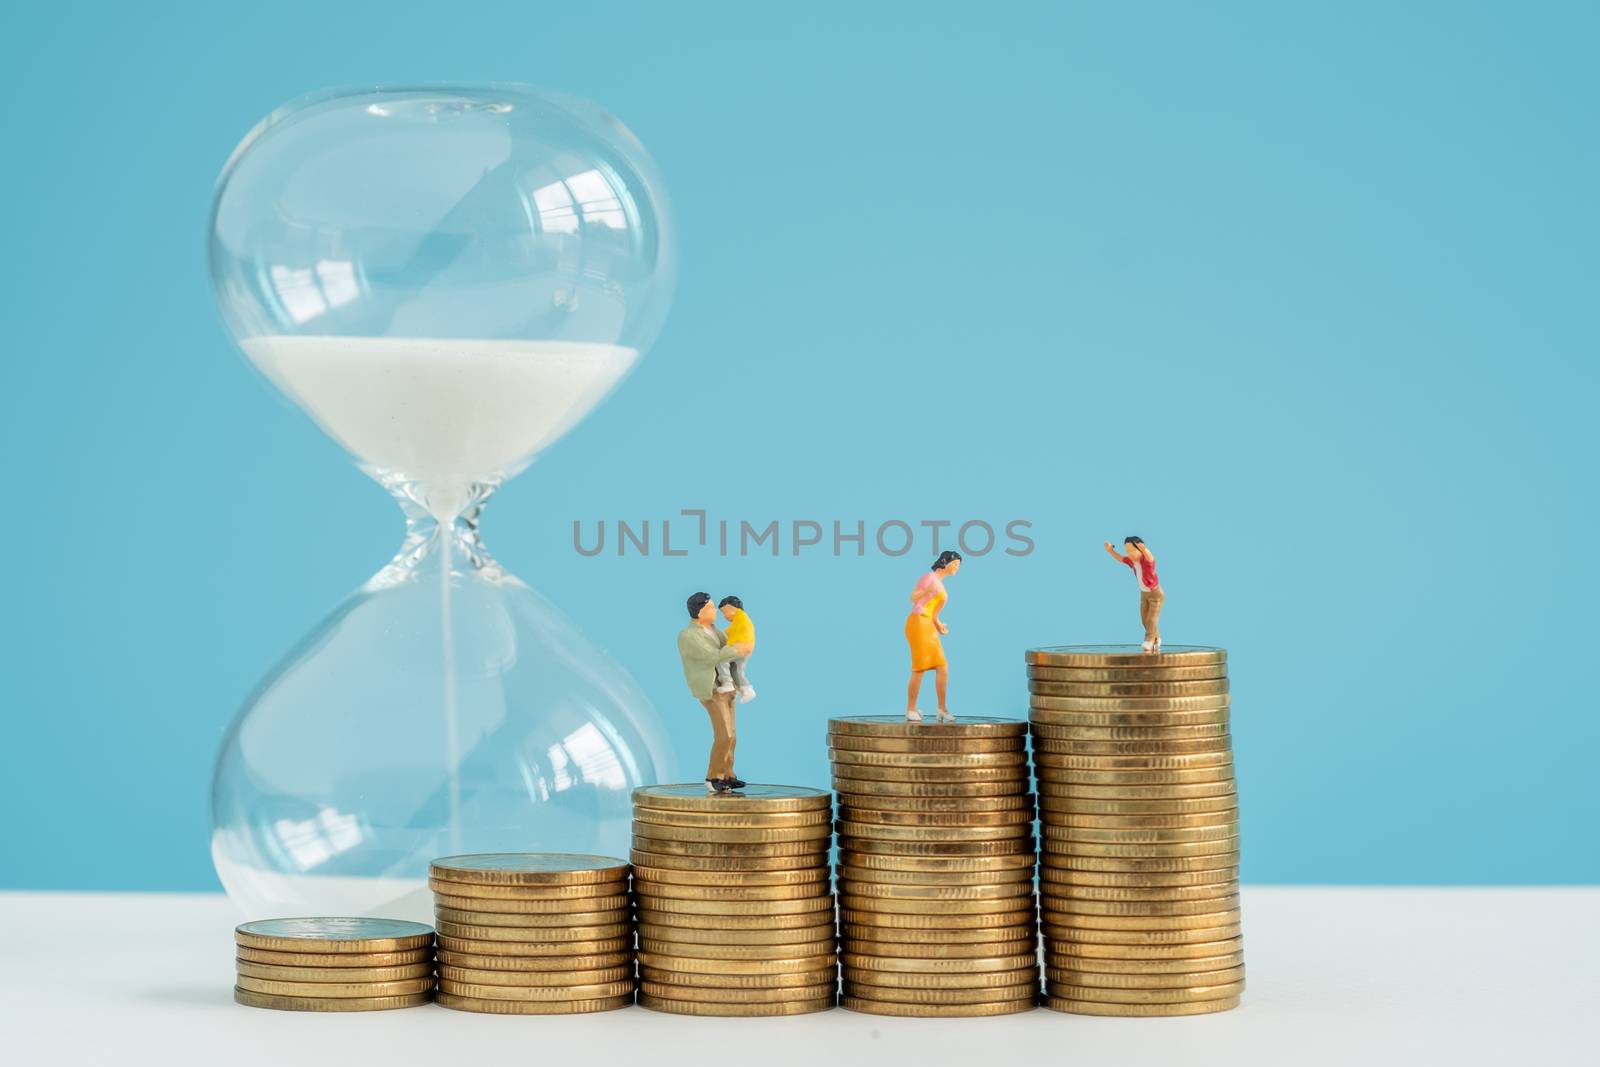 hourglass and stack coin with savings substantial money inside f by Toefotostock